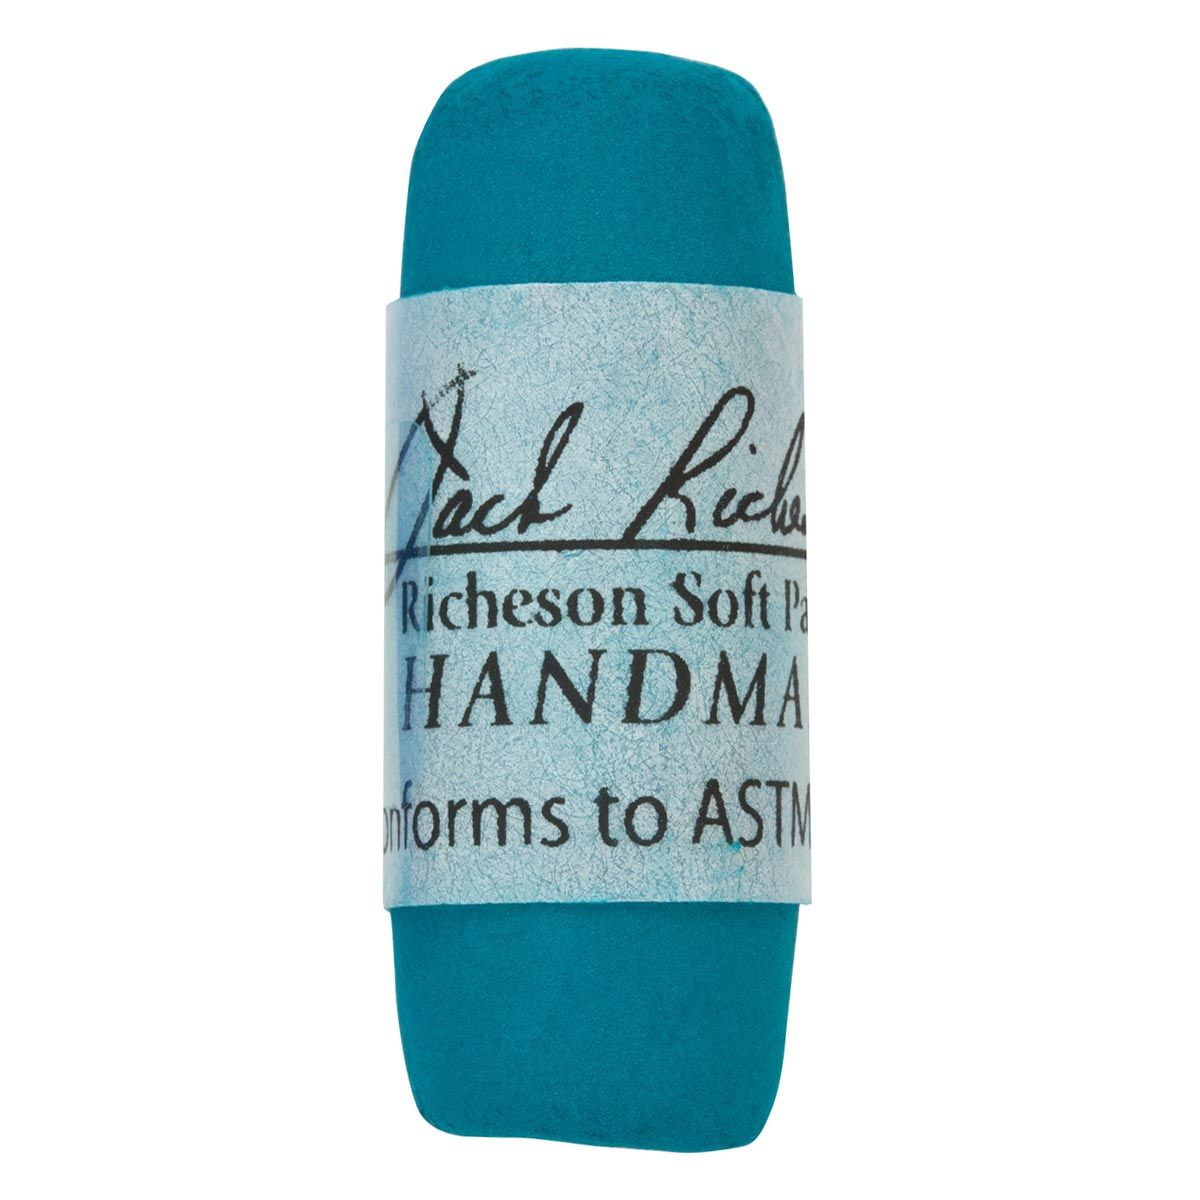 Richeson Soft Hand-Rolled Pastel - Turquoise Green 240